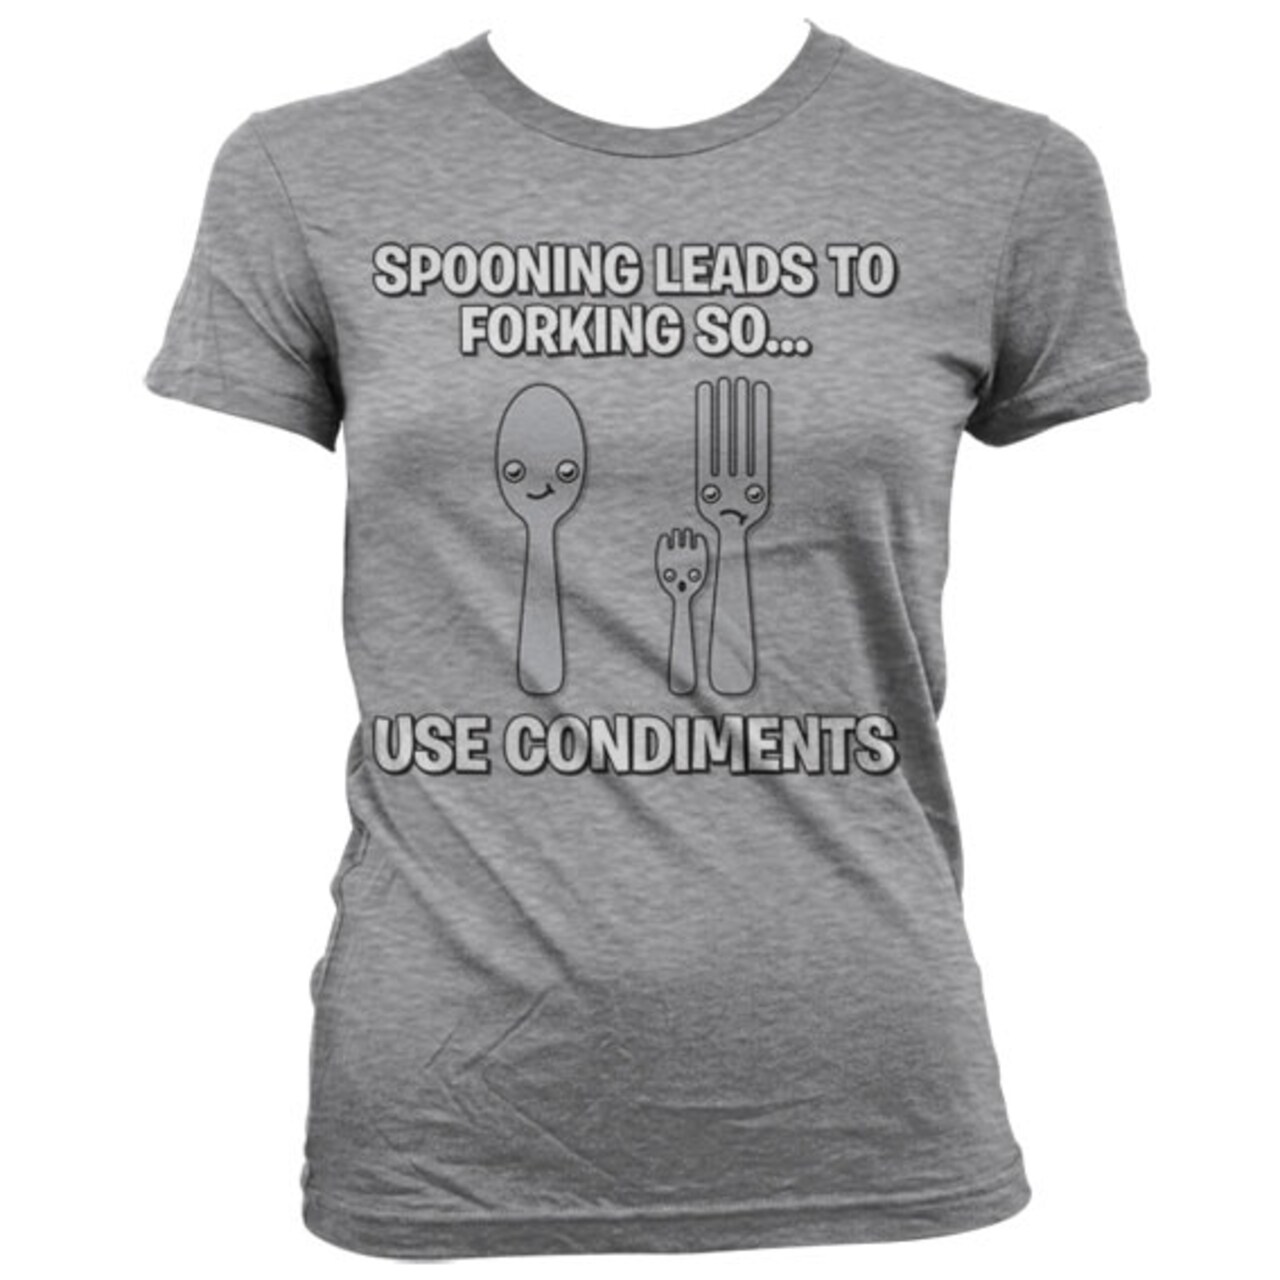 Spooning Leads To Forking So Use Condiments Girly T-Shirt - Shirtstore